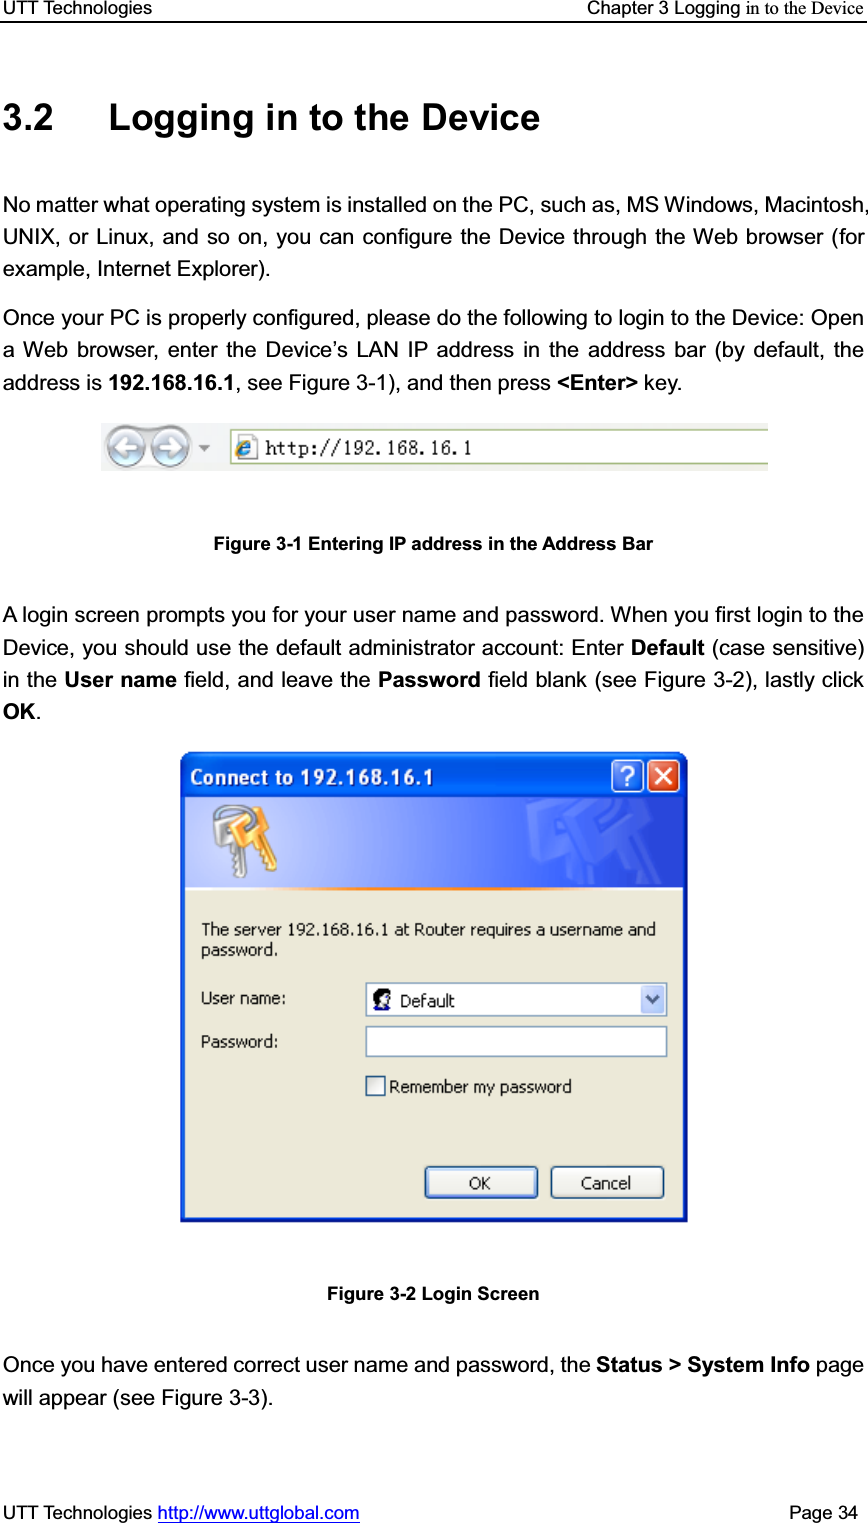 UTT Technologies    Chapter 3 Logging in to the DeviceUTT Technologies http://www.uttglobal.com                                              Page 34 3.2  Logging in to the Device No matter what operating system is installed on the PC, such as, MS Windows, Macintosh, UNIX, or Linux, and so on, you can configure the Device through the Web browser (for example, Internet Explorer). Once your PC is properly configured, please do the following to login to the Device: Open a Web browser, enter the Device¶s LAN IP address in the address bar (by default, the address is 192.168.16.1, see Figure 3-1), and then press &lt;Enter&gt; key. Figure 3-1 Entering IP address in the Address Bar A login screen prompts you for your user name and password. When you first login to the Device, you should use the default administrator account: Enter Default (case sensitive) in the User name field, and leave the Password field blank (see Figure 3-2), lastly click OK.Figure 3-2 Login Screen Once you have entered correct user name and password, the Status &gt; System Info page will appear (see Figure 3-3).   